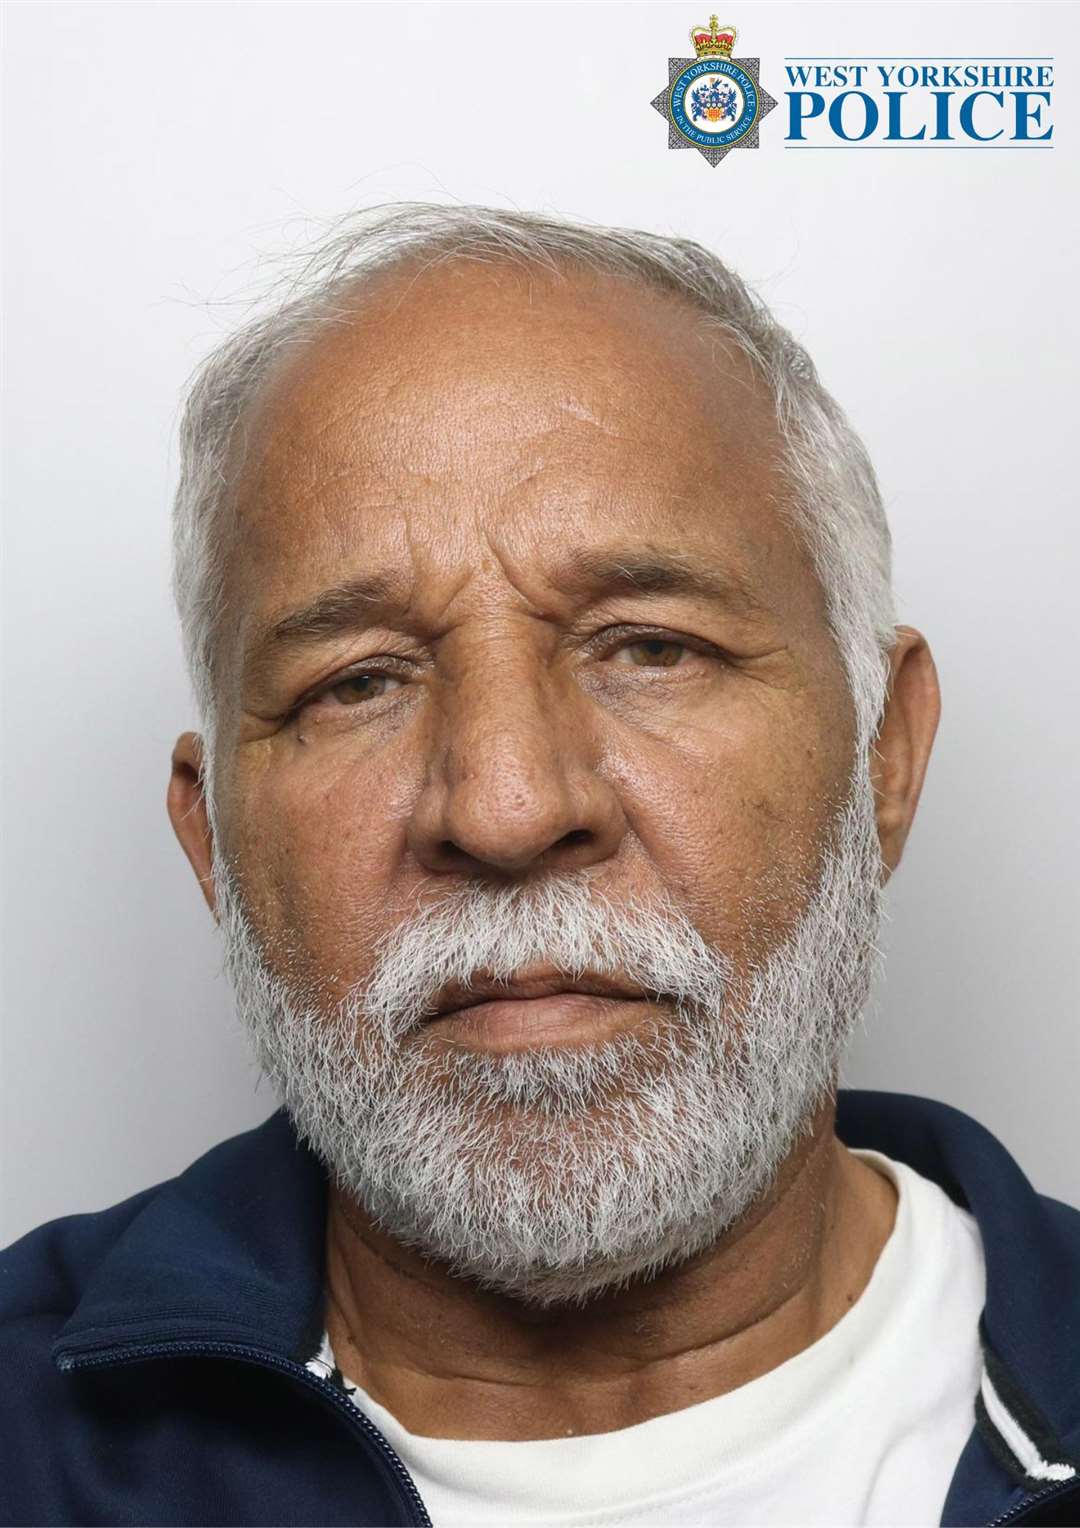 Piran Ditta Khan, 75, was found guilty at Leeds Crown Court of the murder of Pc Sharon Beshenivsky (West Yorkshire Police/PA)